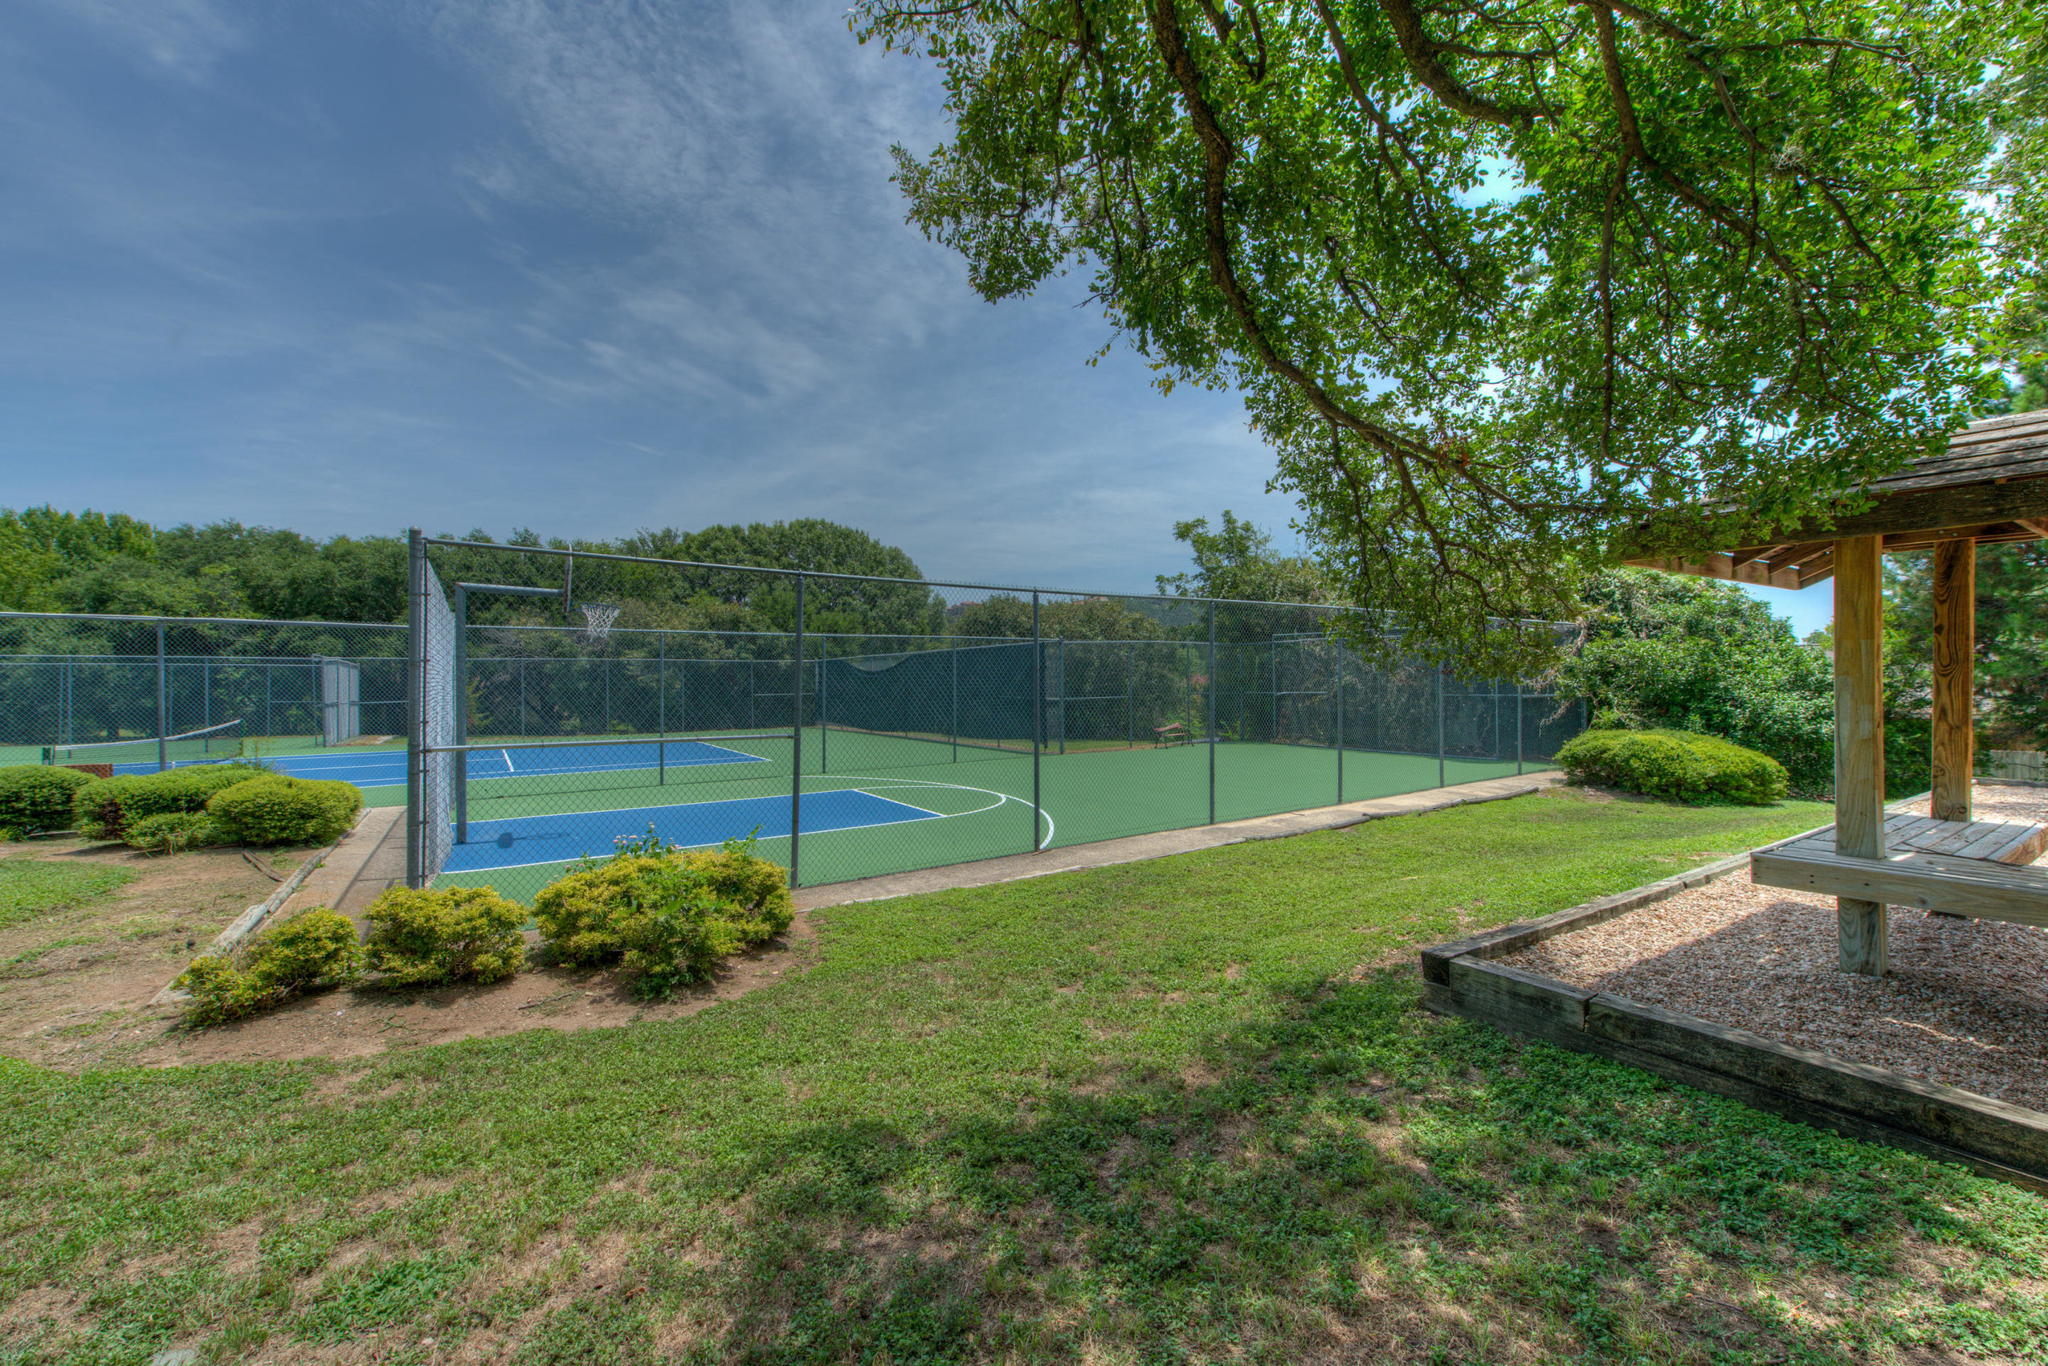 Community park and tennis courts